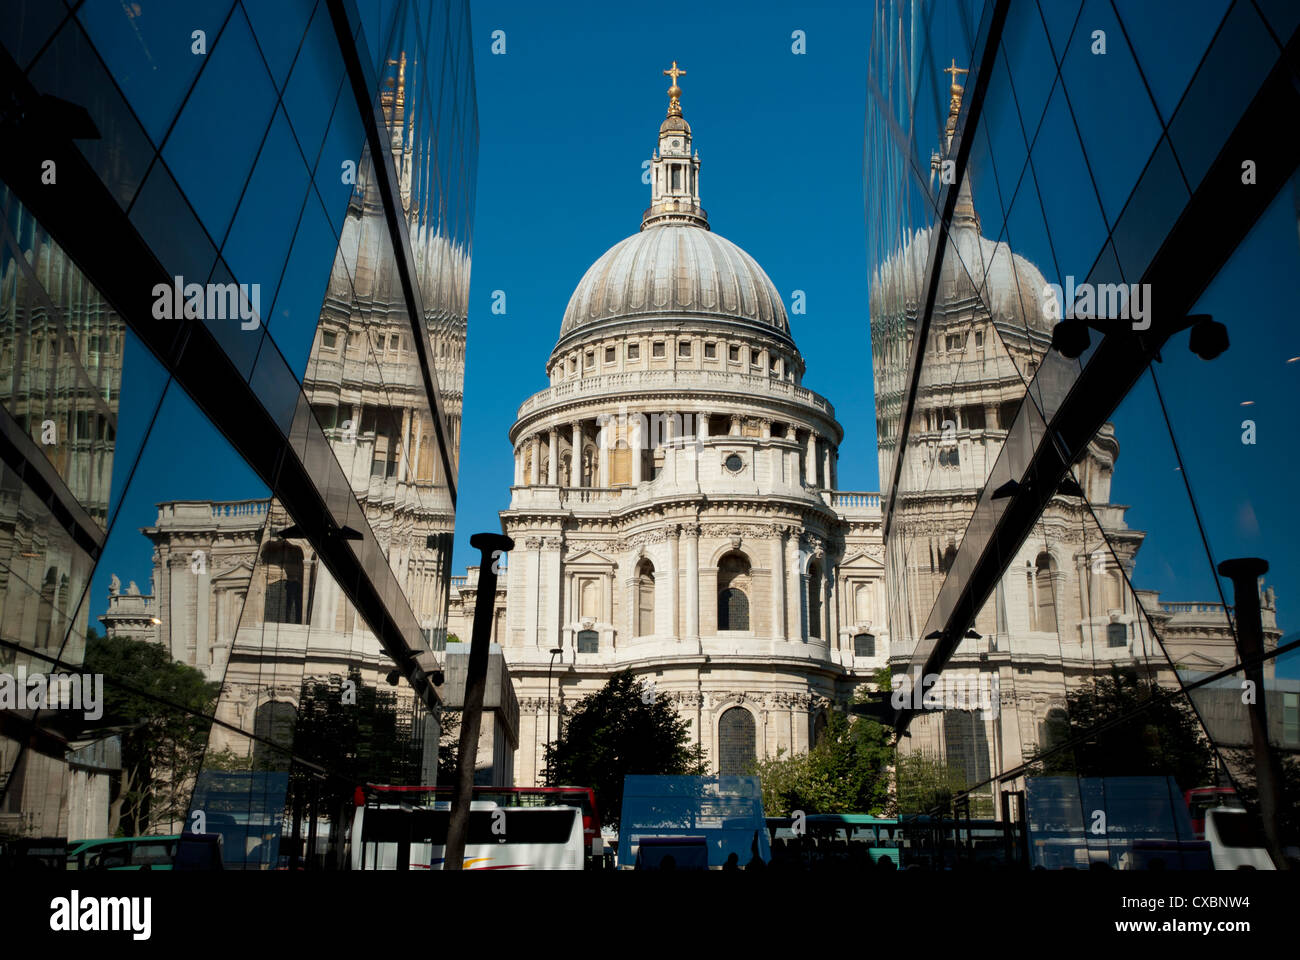 St Paul's Cathedral reflected in One New Change building, Cheapside, City of London, England, UK Stock Photo